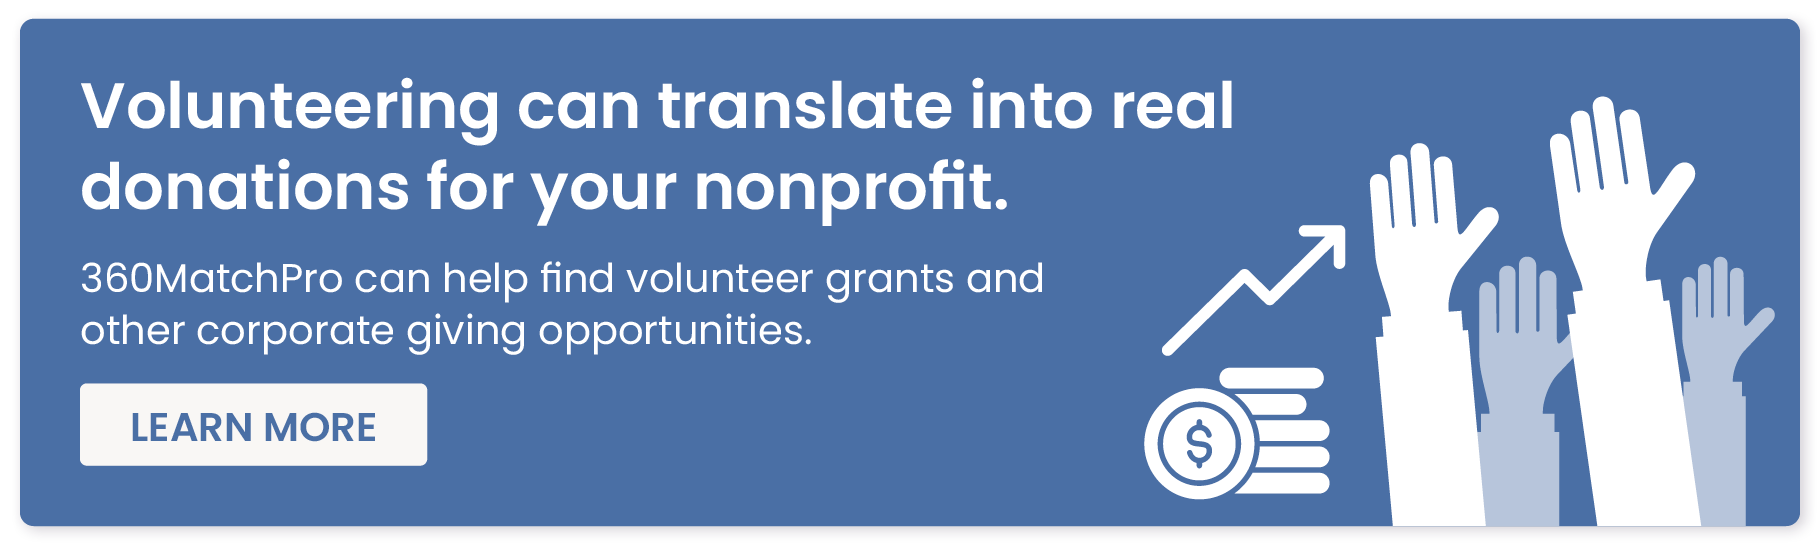 Volunteering can translate into real dollars earned for nonprofits. 360MatchPro can help find volunteer grants and other corporate giving opportunities. Learn more by clicking here.